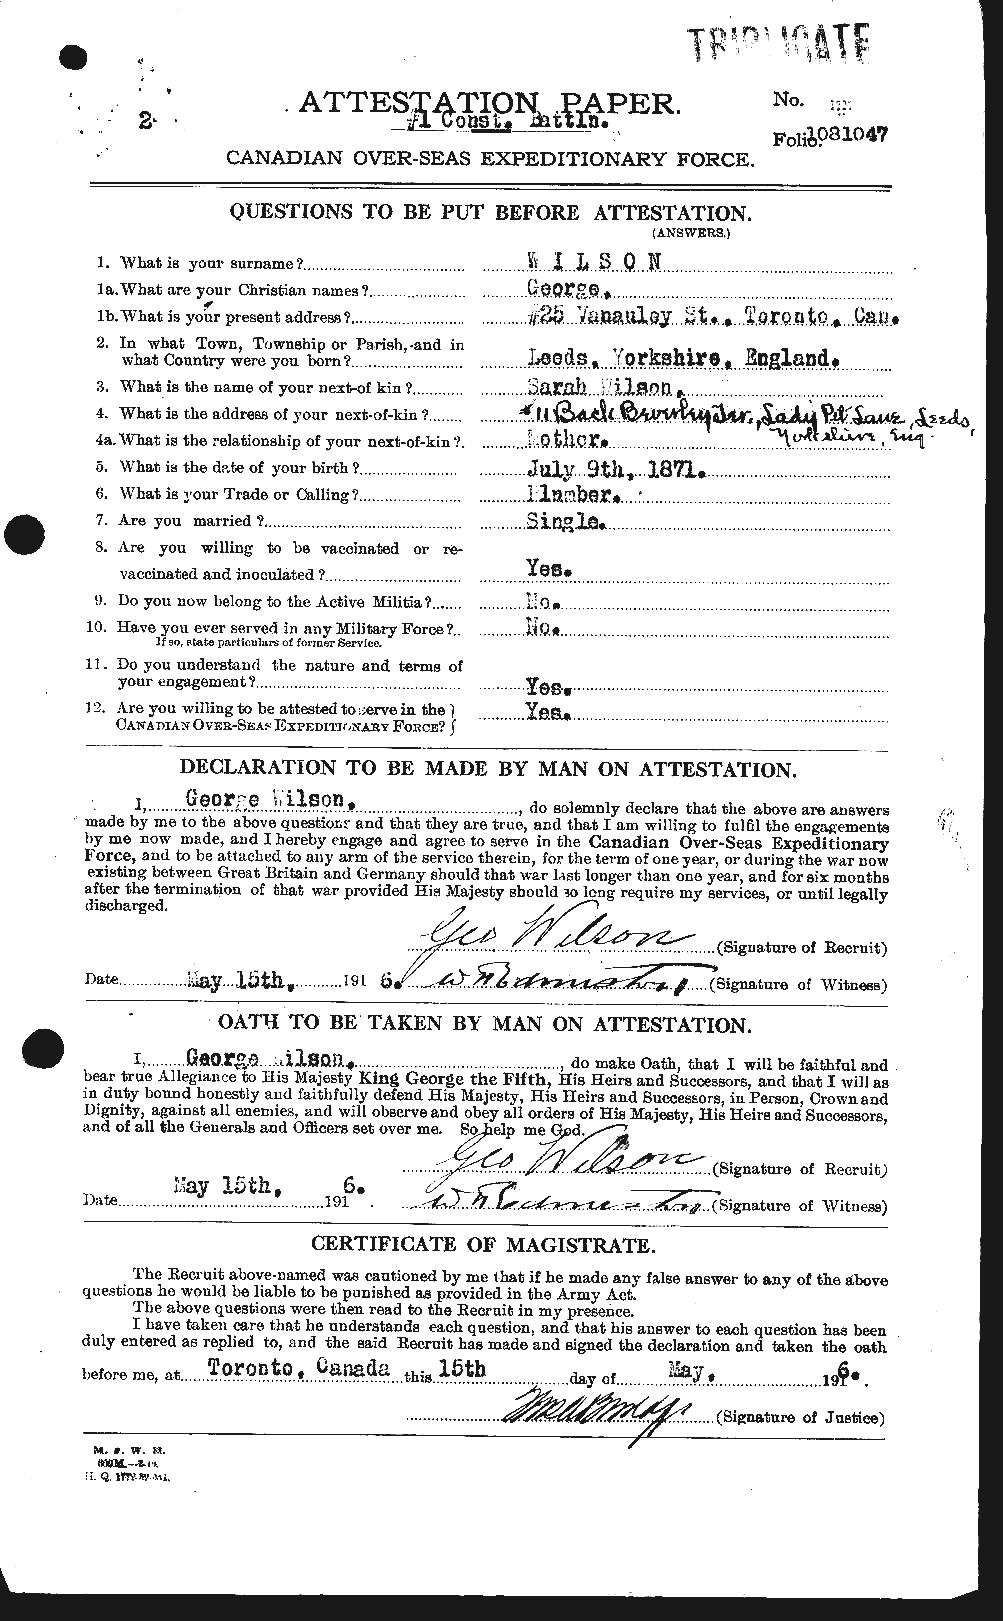 Personnel Records of the First World War - CEF 677638a